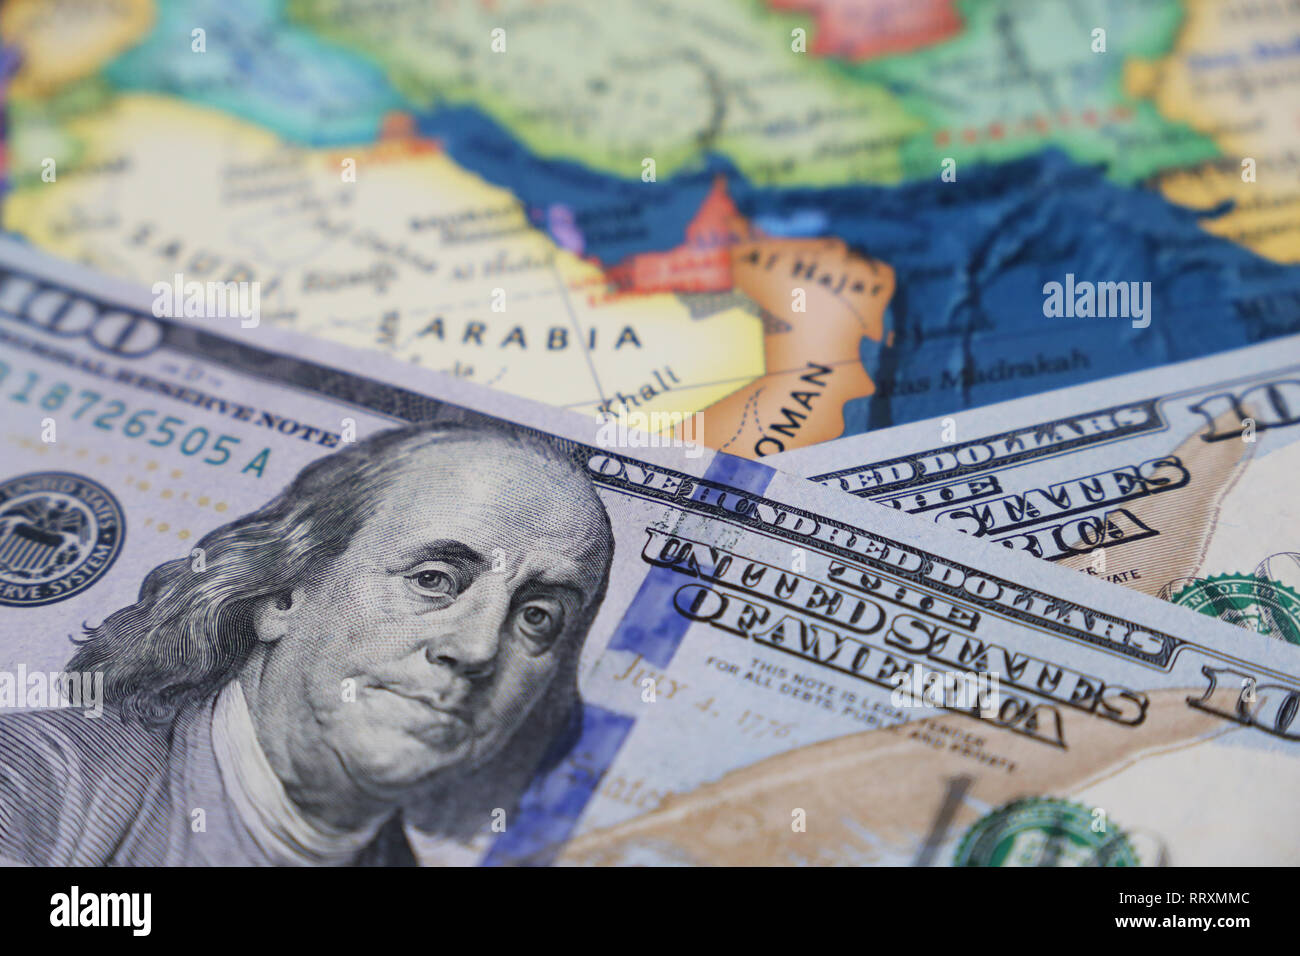 US dollars on the map of Saudi Arabia. American investment and trading with the Persian Gulf countries, arabian economy, oil industry Stock Photo